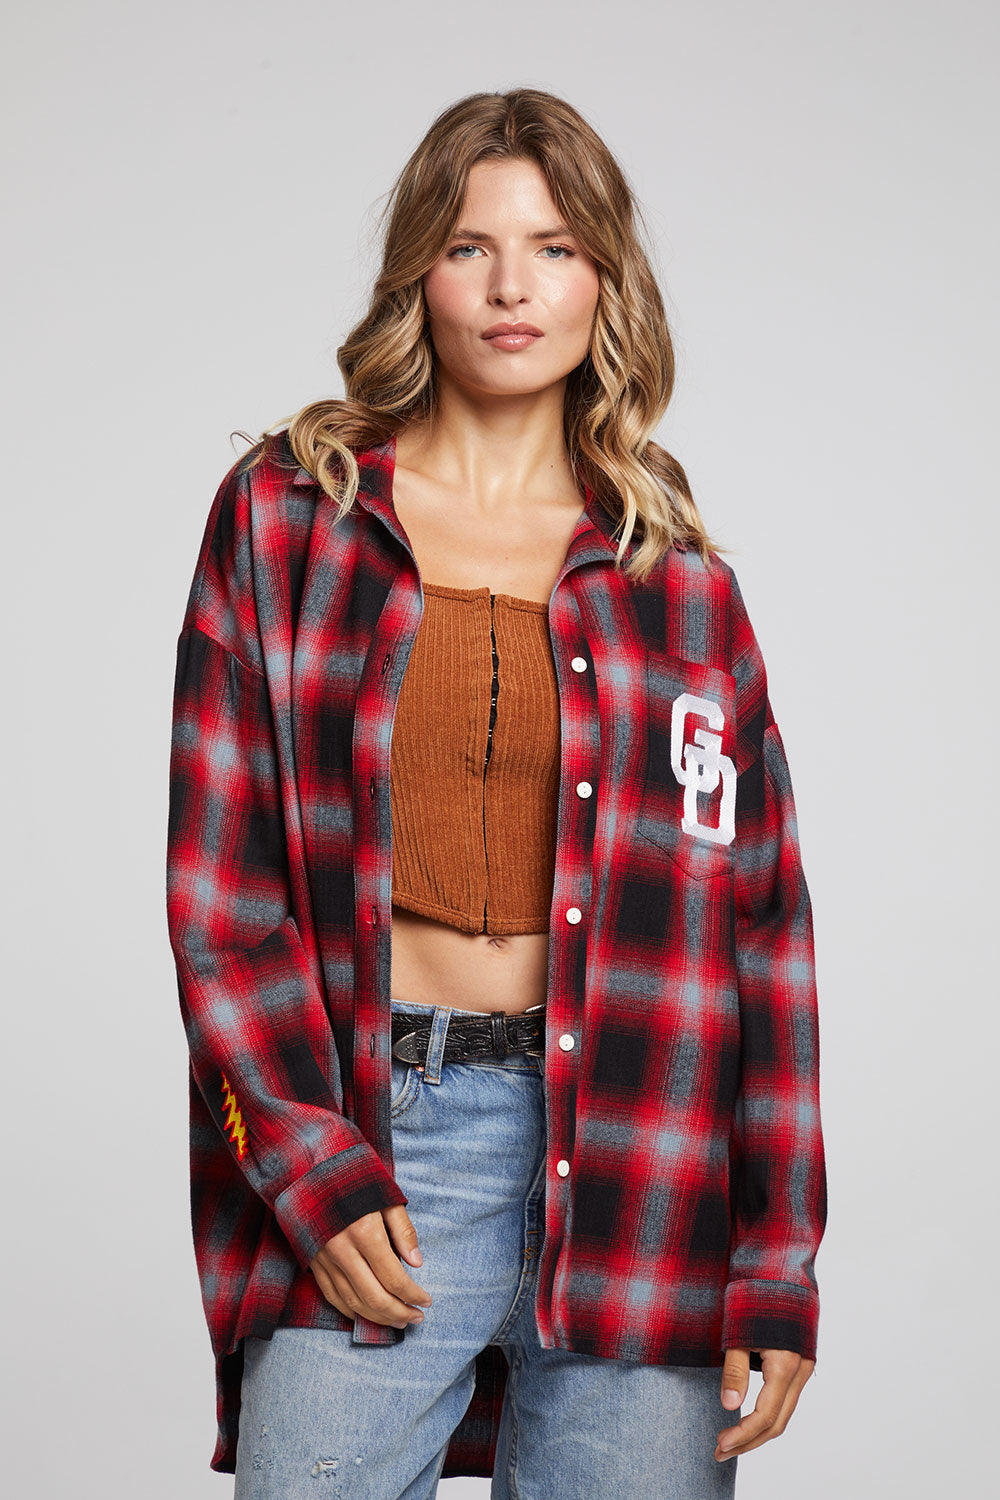 Grateful Dead Dancing Bear Button Down Flannel - Red and Black